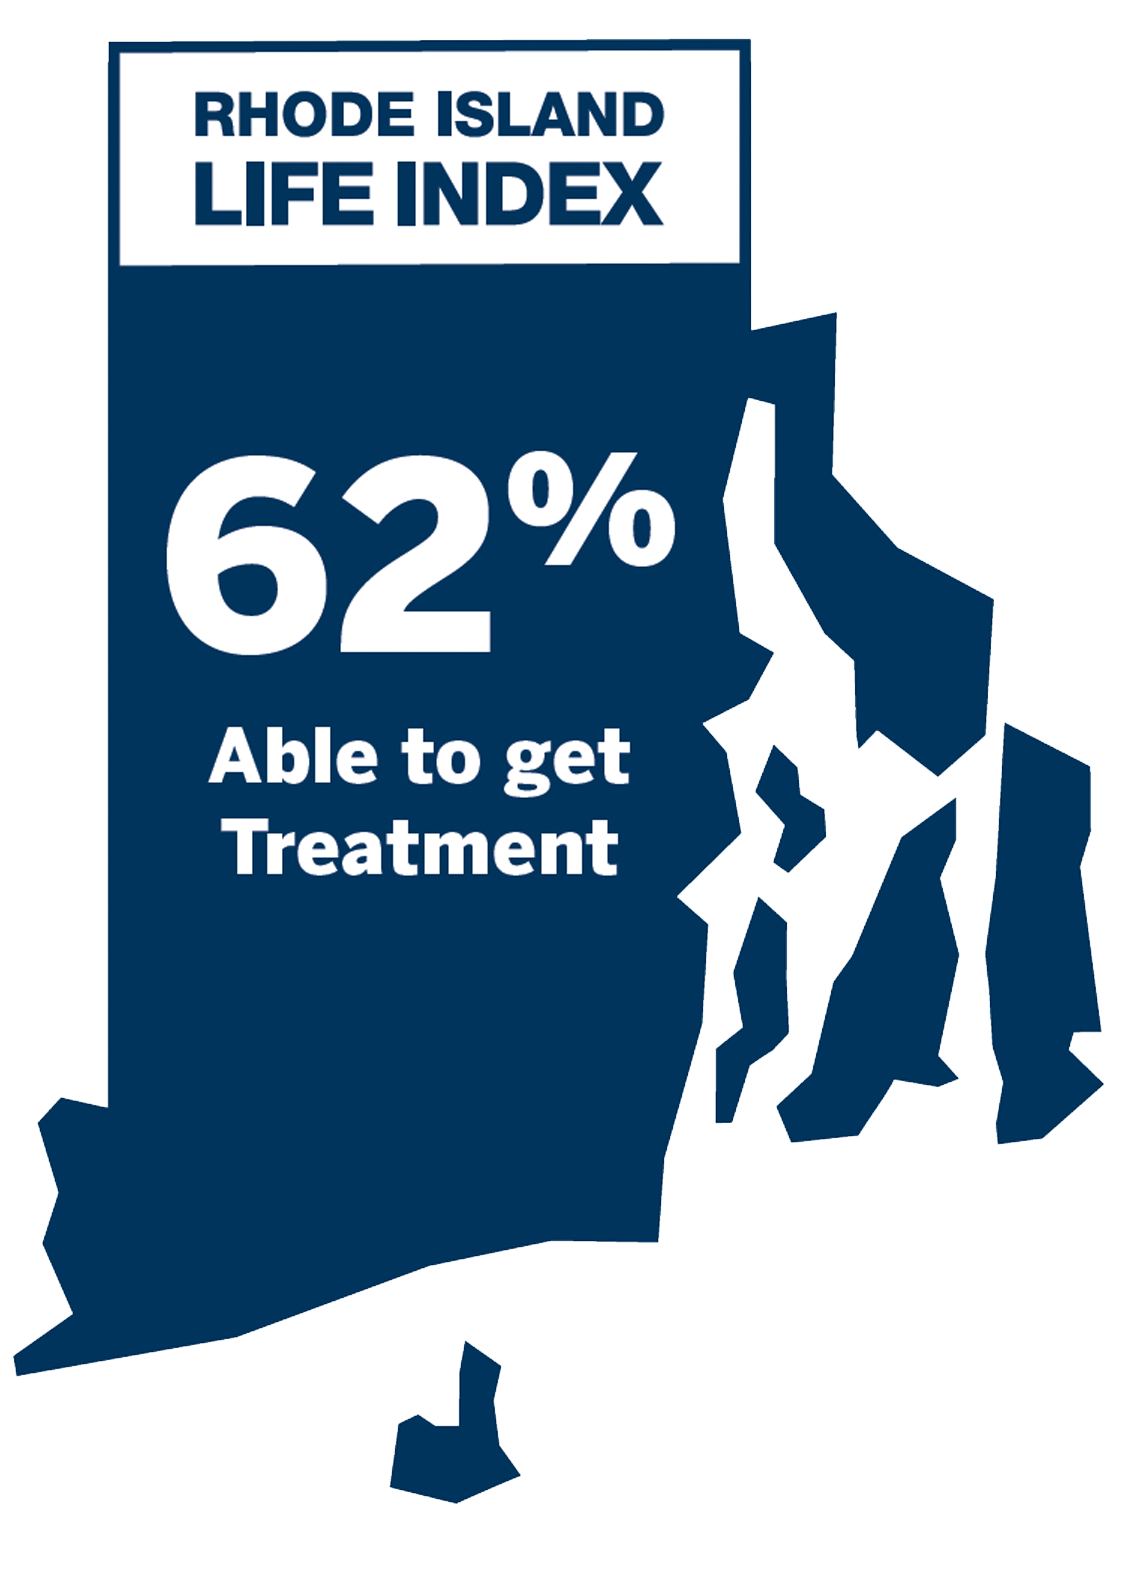 Able to Get Treatment: 62%